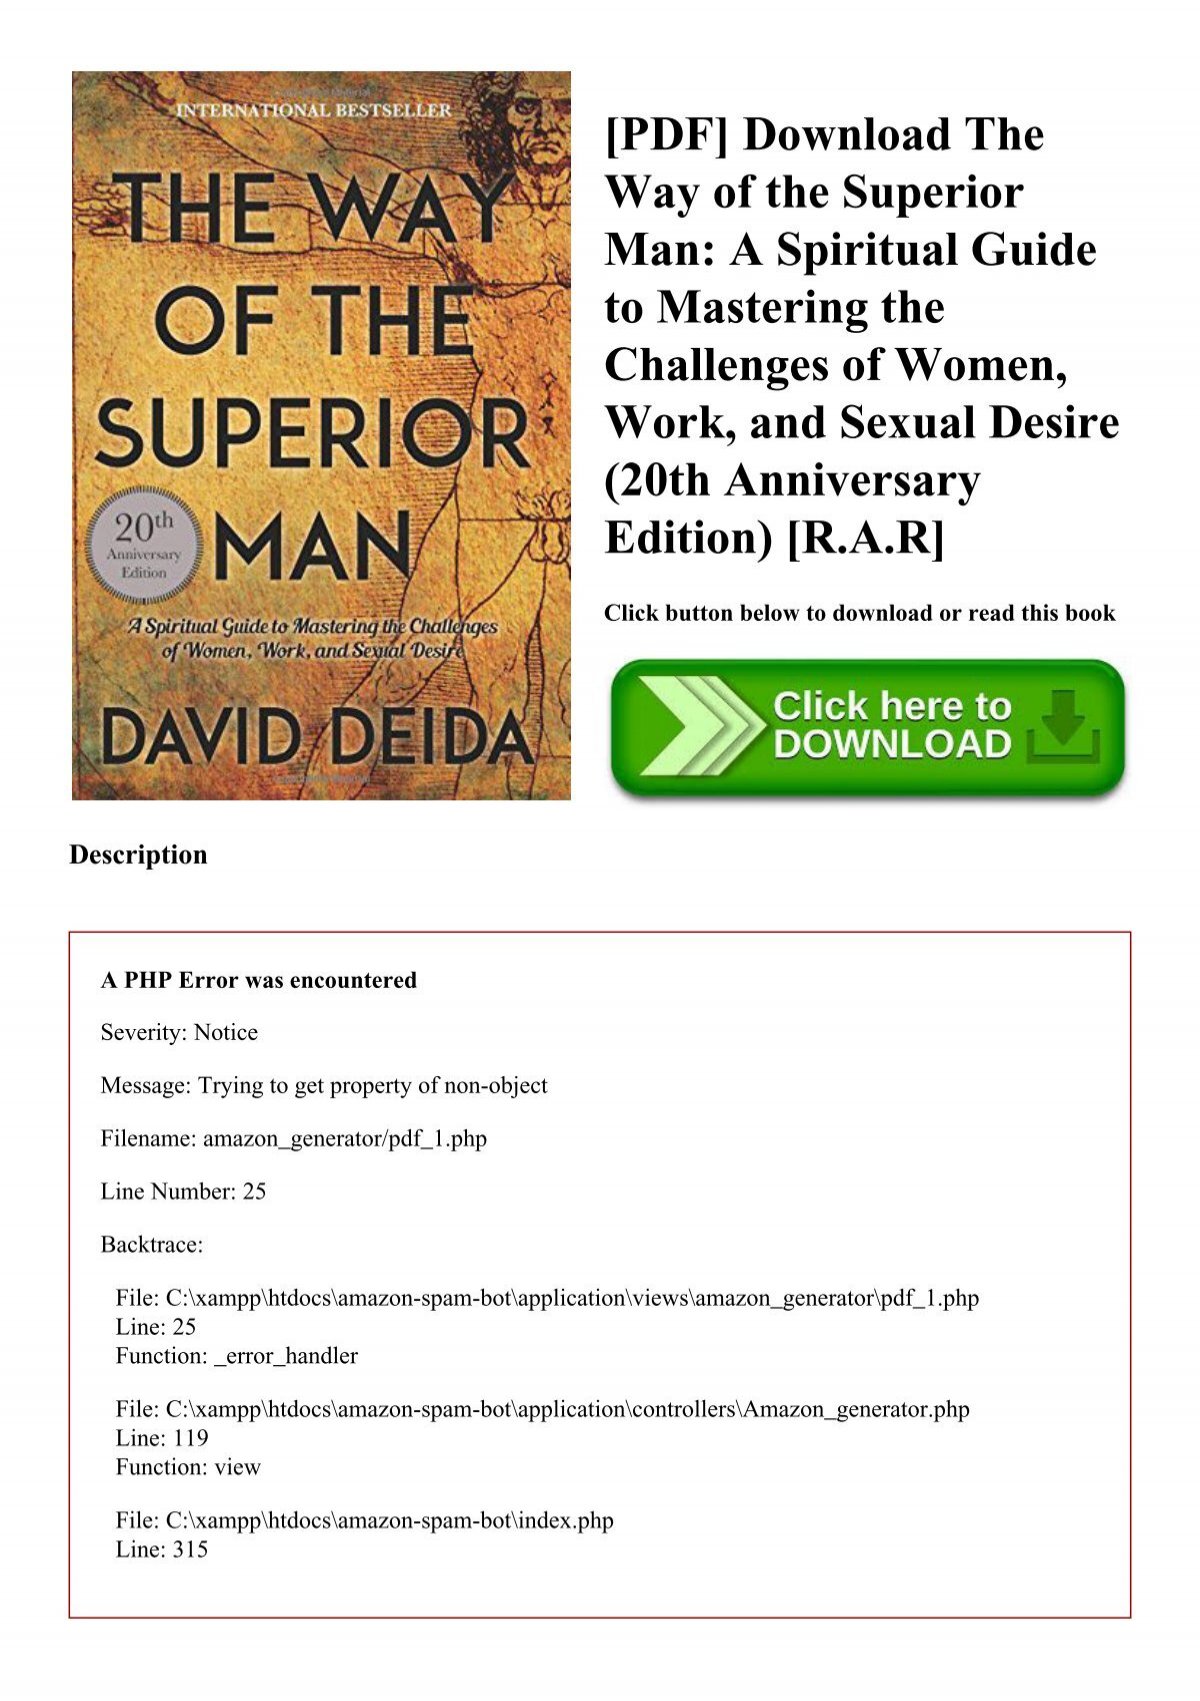 Pdf Download The Way Of The Superior Man A Spiritual Guide To Mastering The Challenges Of Women Work And Sexual Desire th Anniversary Edition R A R